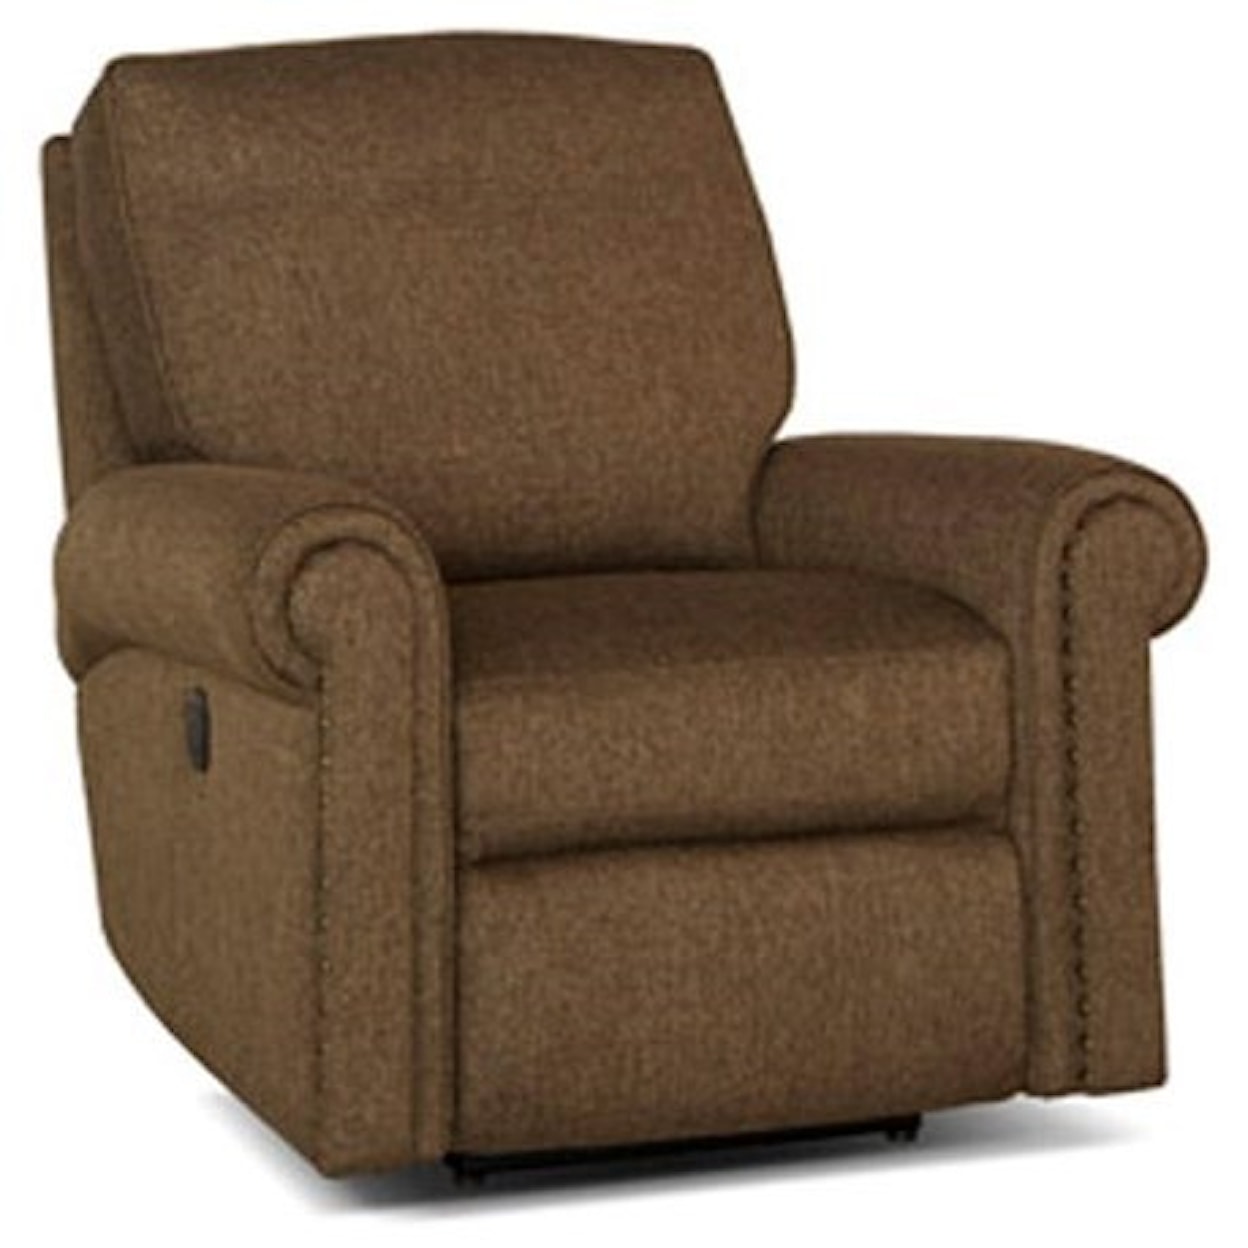 Smith Brothers 420 Swivel Glider Reclining Chair